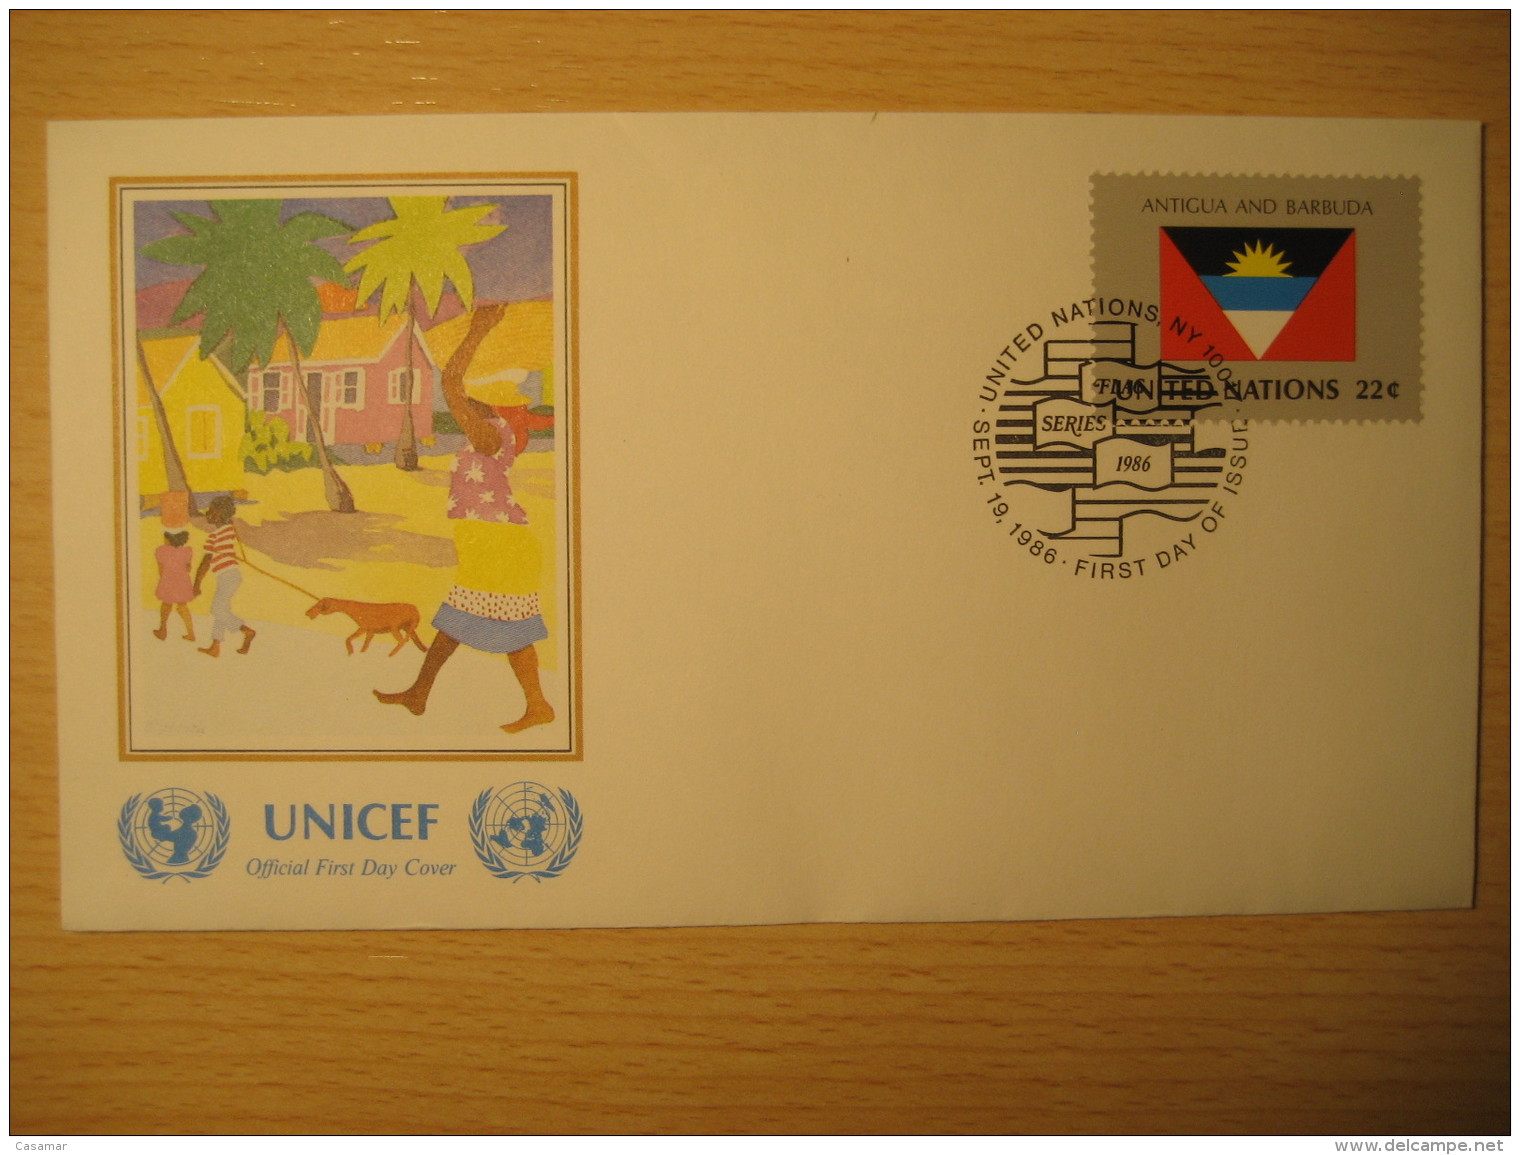 ANTIGUA AND BARBUDA New York 1986 FDC Cancel UNICEF Cover UNITED NATIONS UN NY Flag Series Flags Jackie Lafaurie - Antigua Et Barbuda (1981-...)